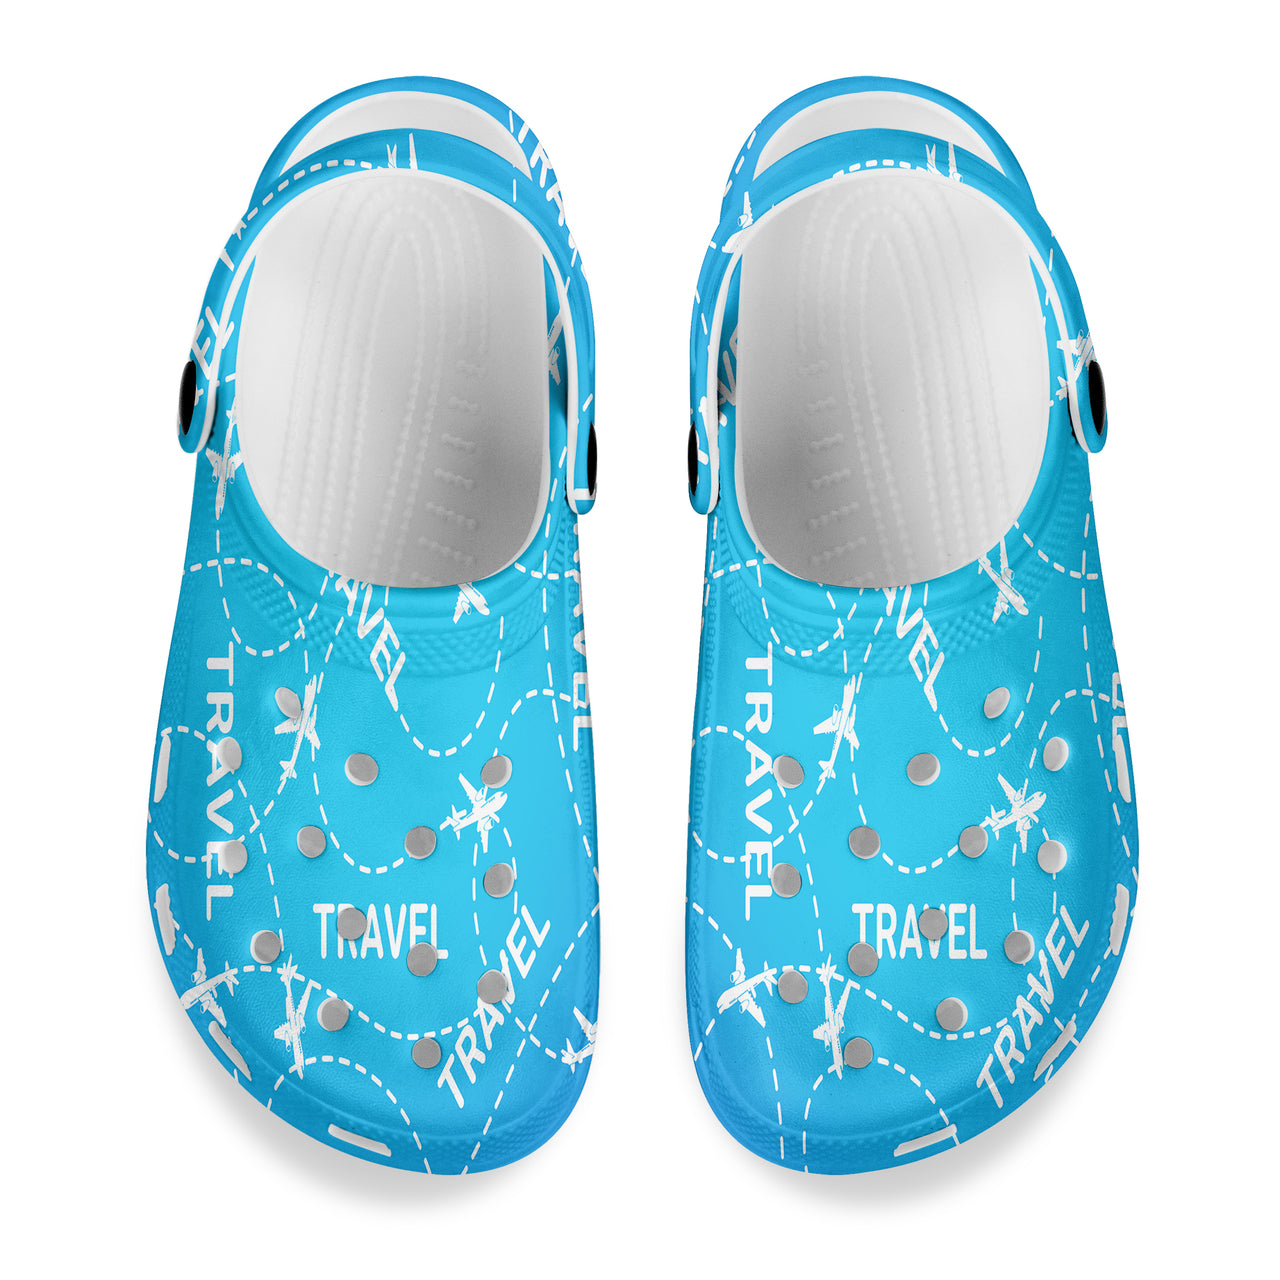 Travel & Planes Designed Hole Shoes & Slippers (WOMEN)